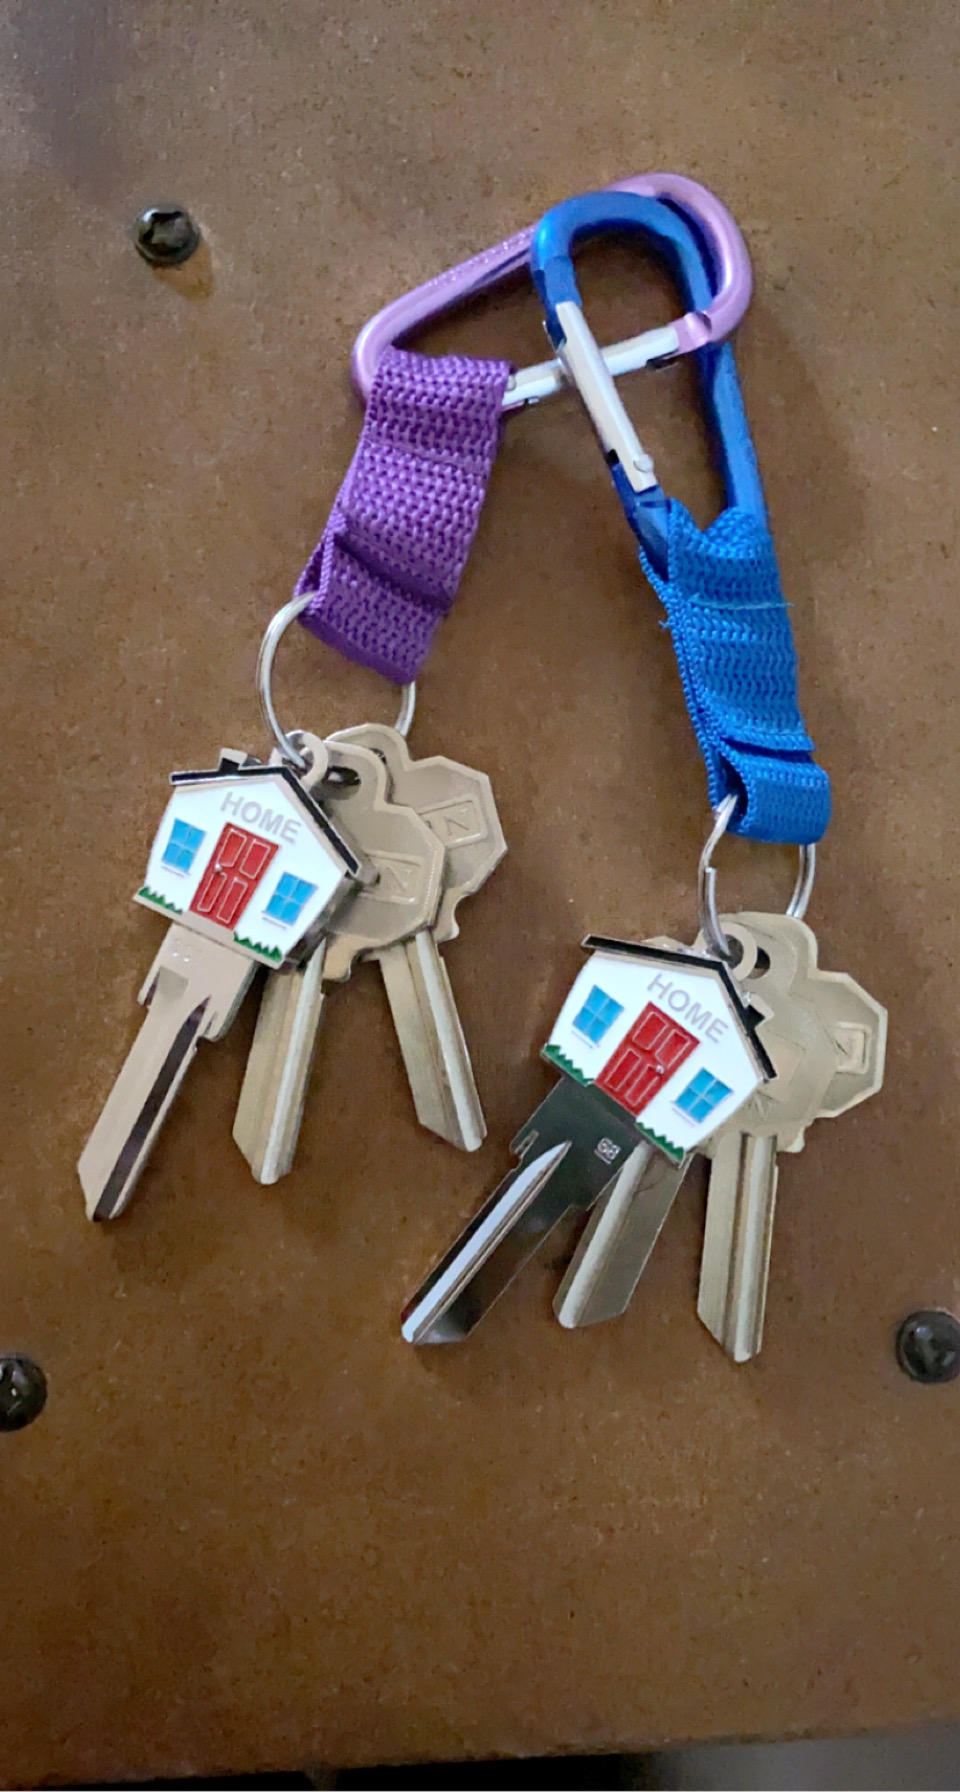 A couple of keys that are hanging from a key holder.